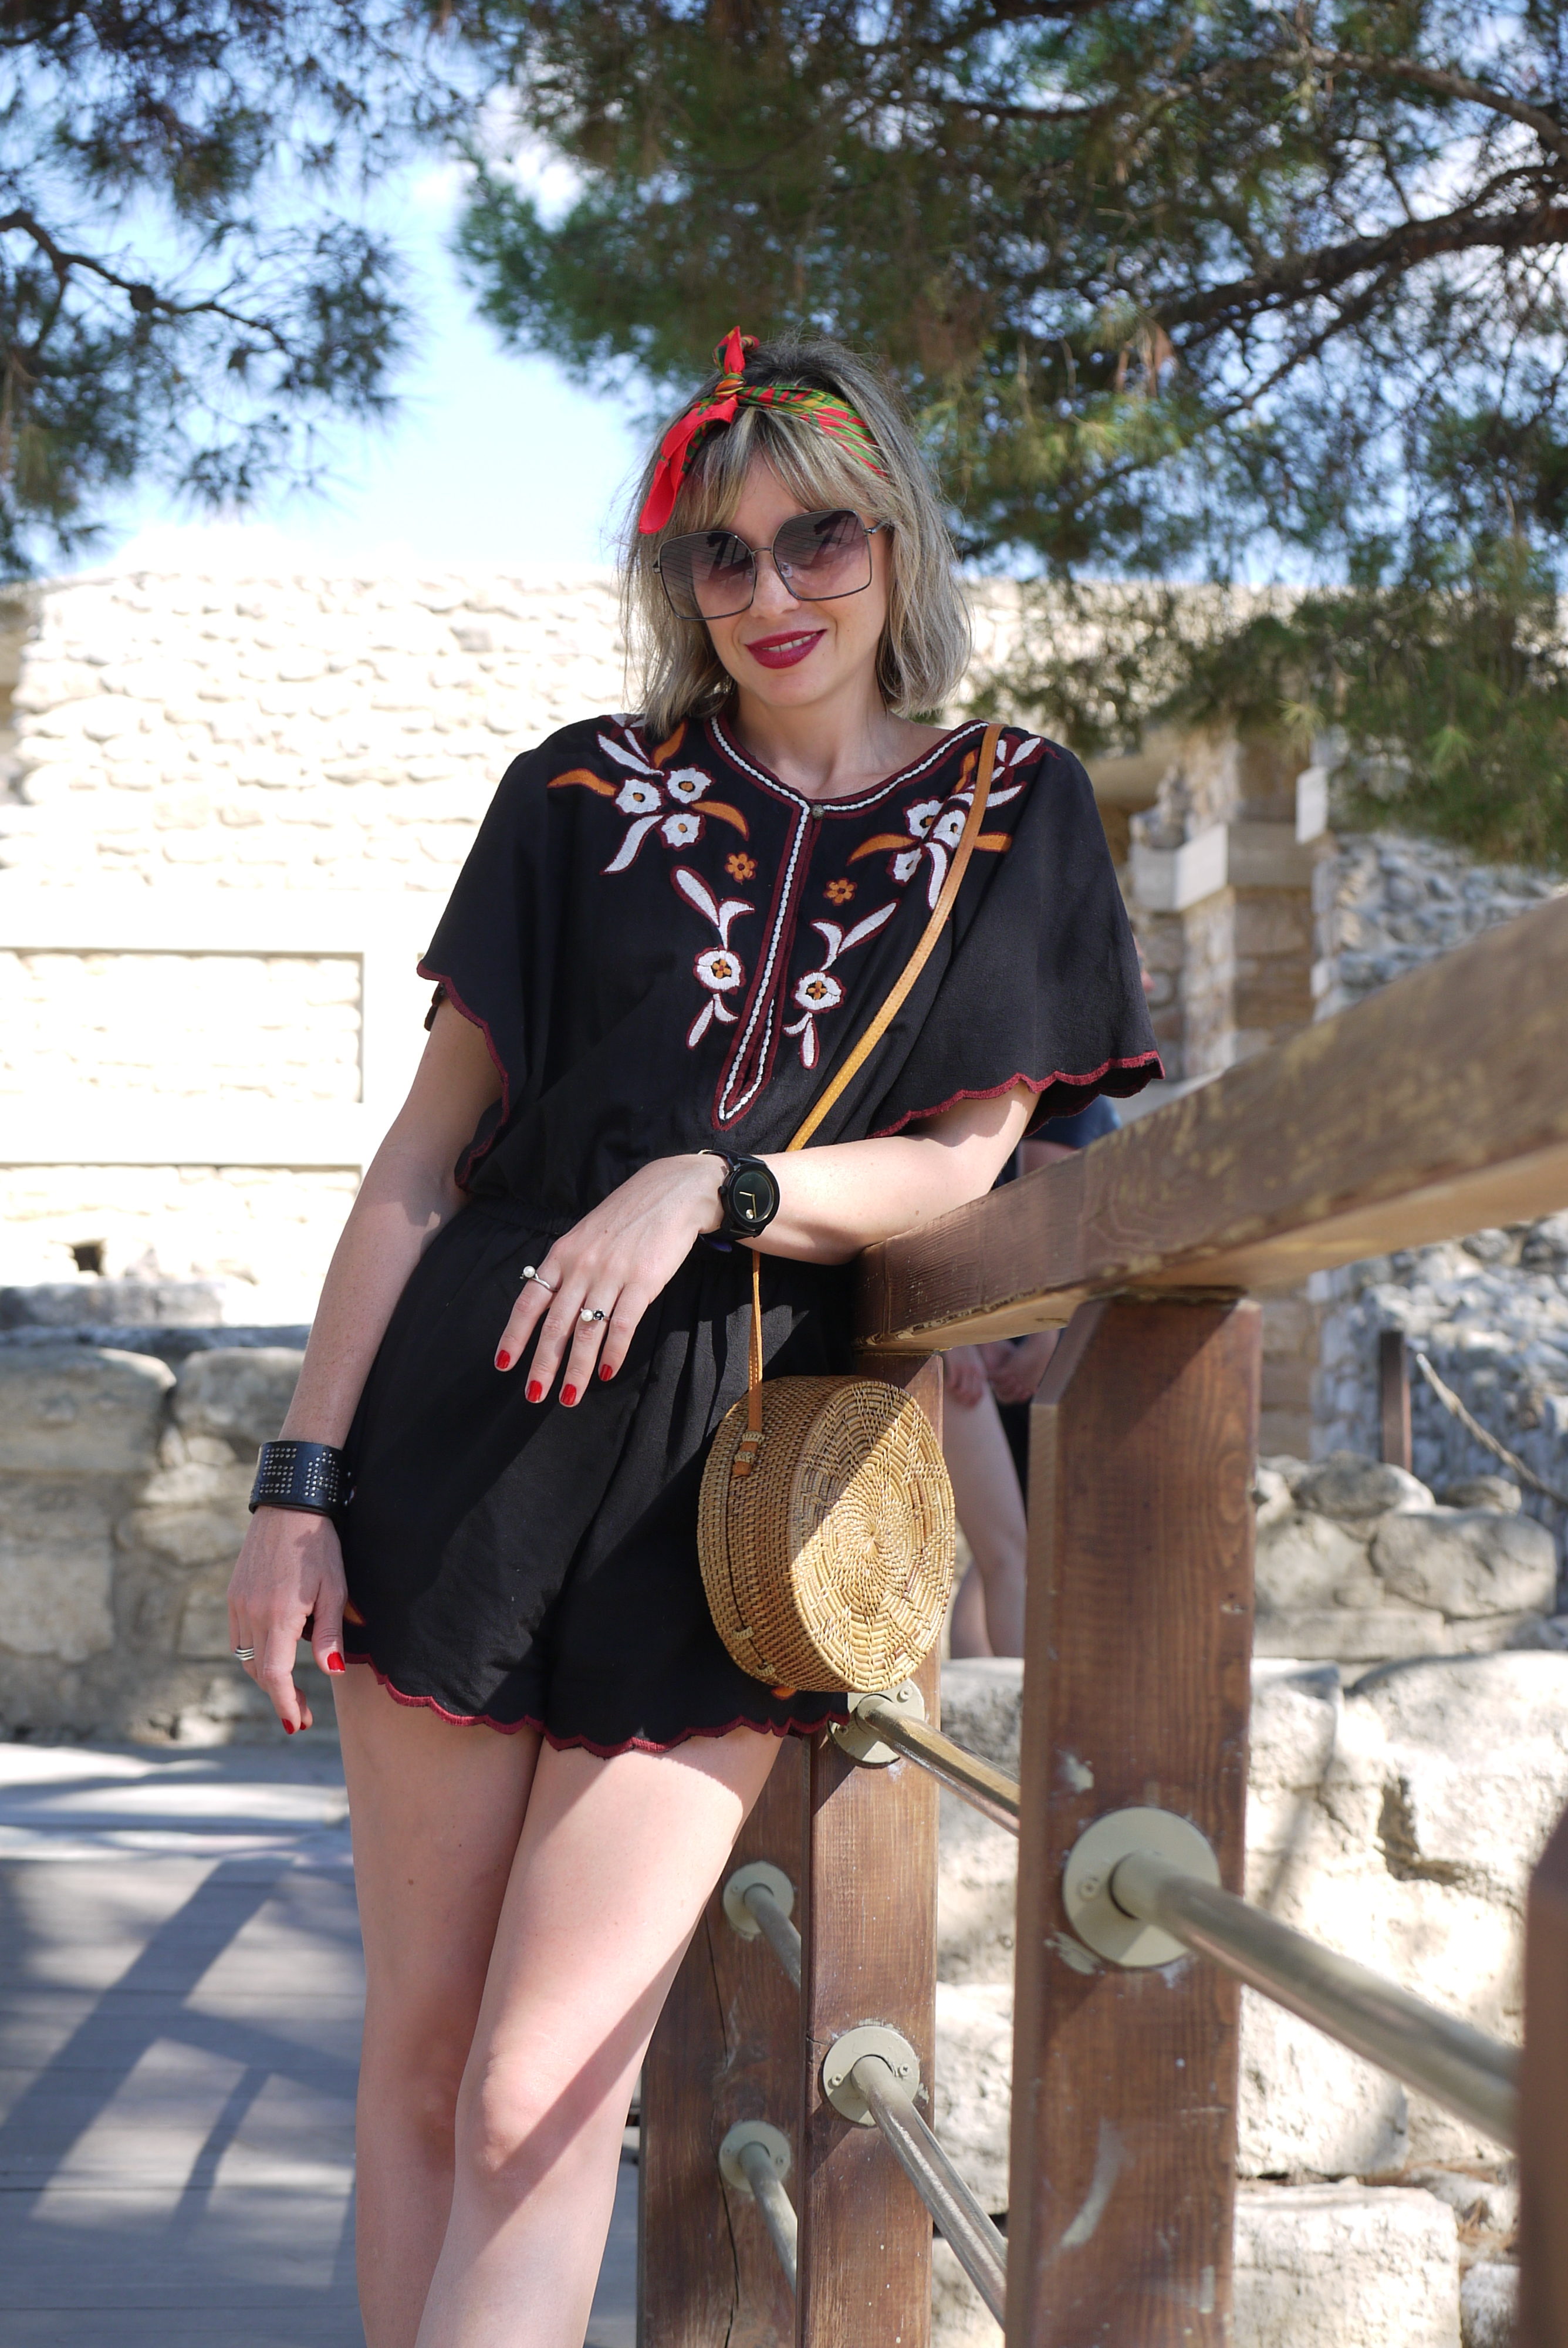 Alba Marina Otero fashion blogger from Mylovelypeople blog shares with you her recently trip to Greece and a little bit of history about Knossos Palace